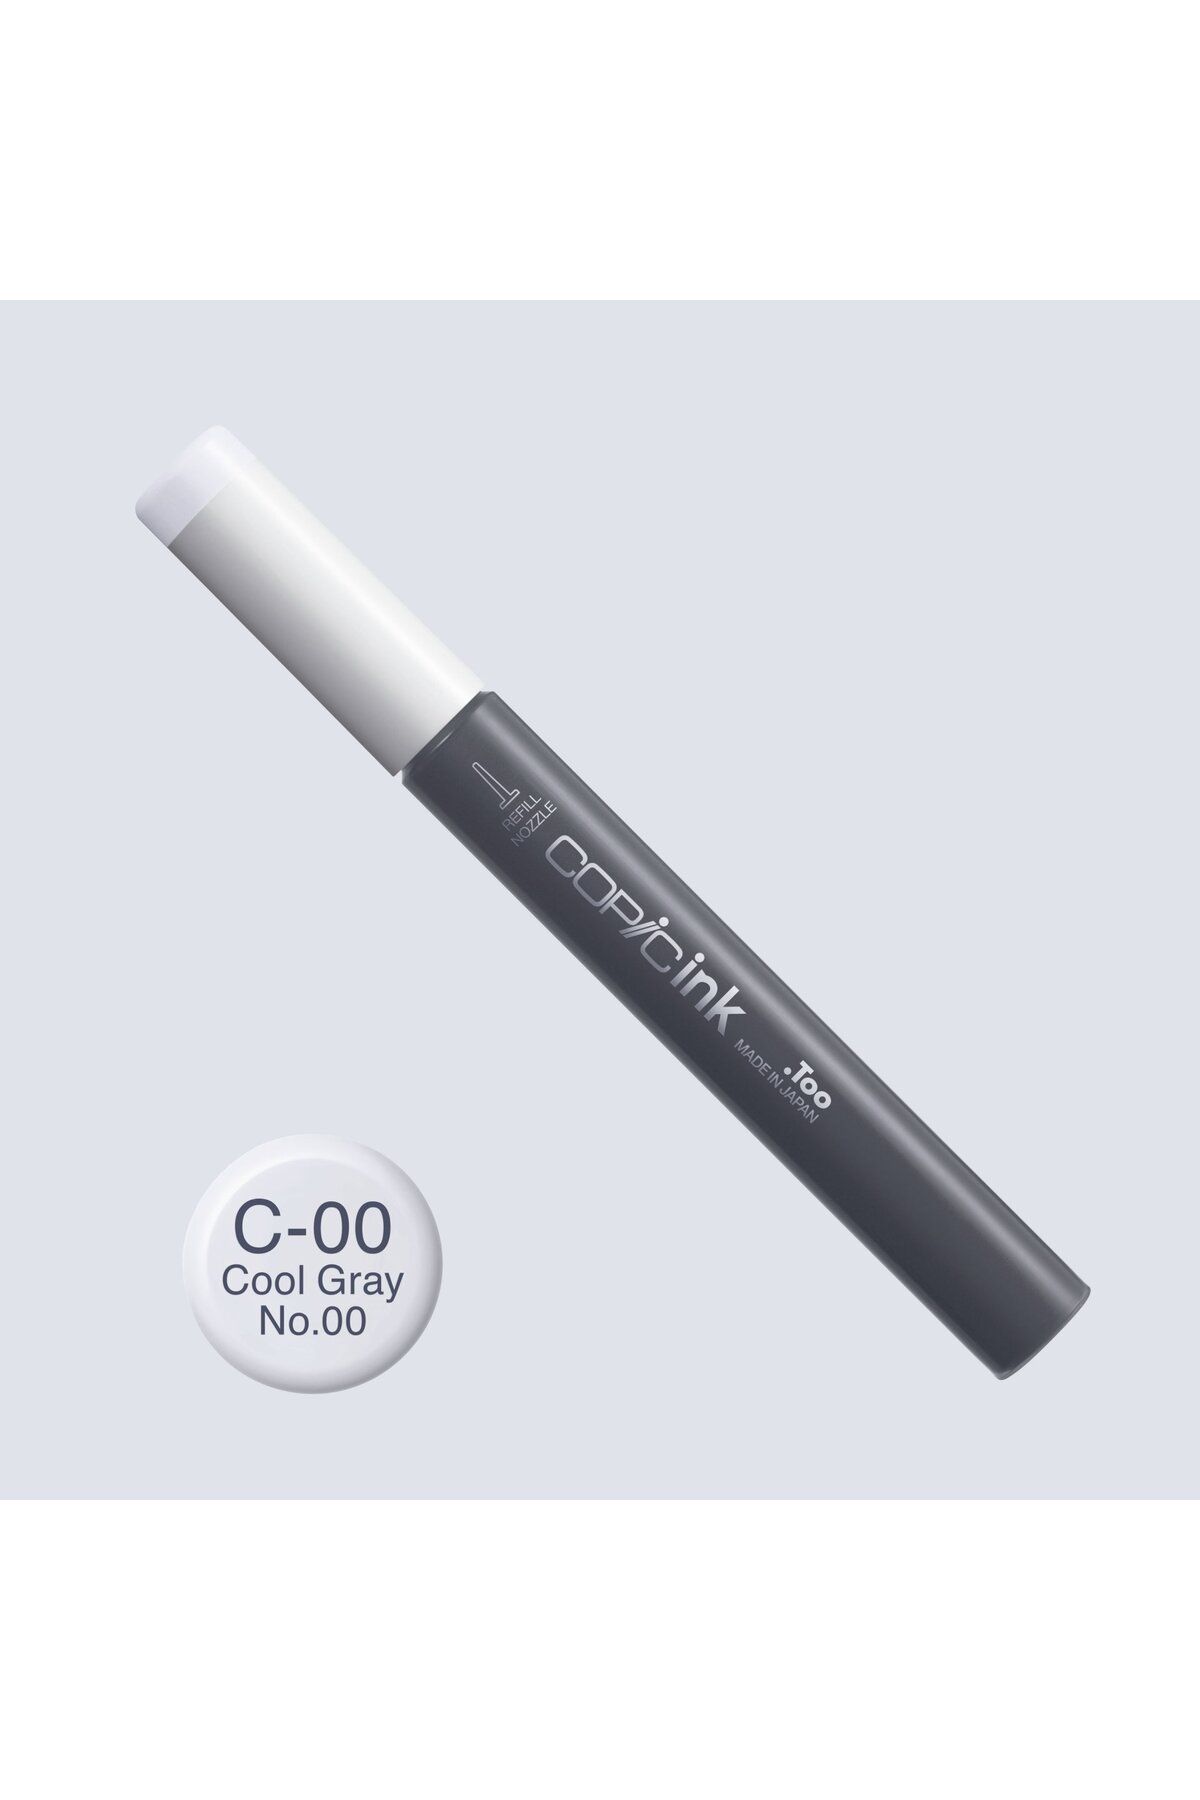 copic İnk Refill 12ml C-00 Cool Gray No.00